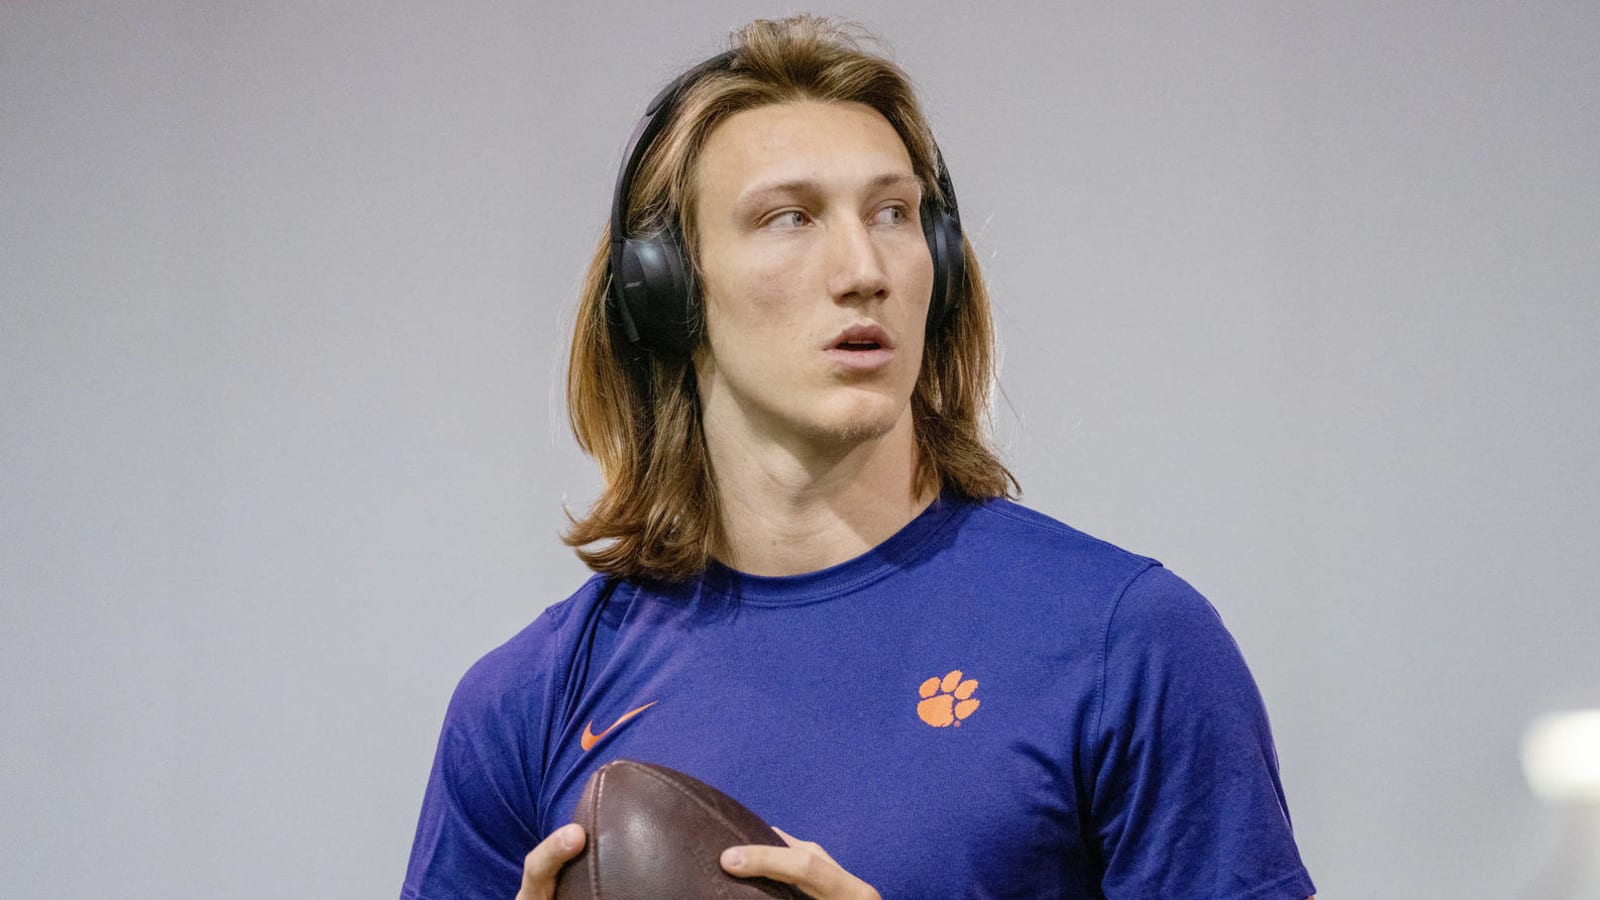 Trevor Lawrence clarifies his love of football after reaction to comments to Sports Illustrated